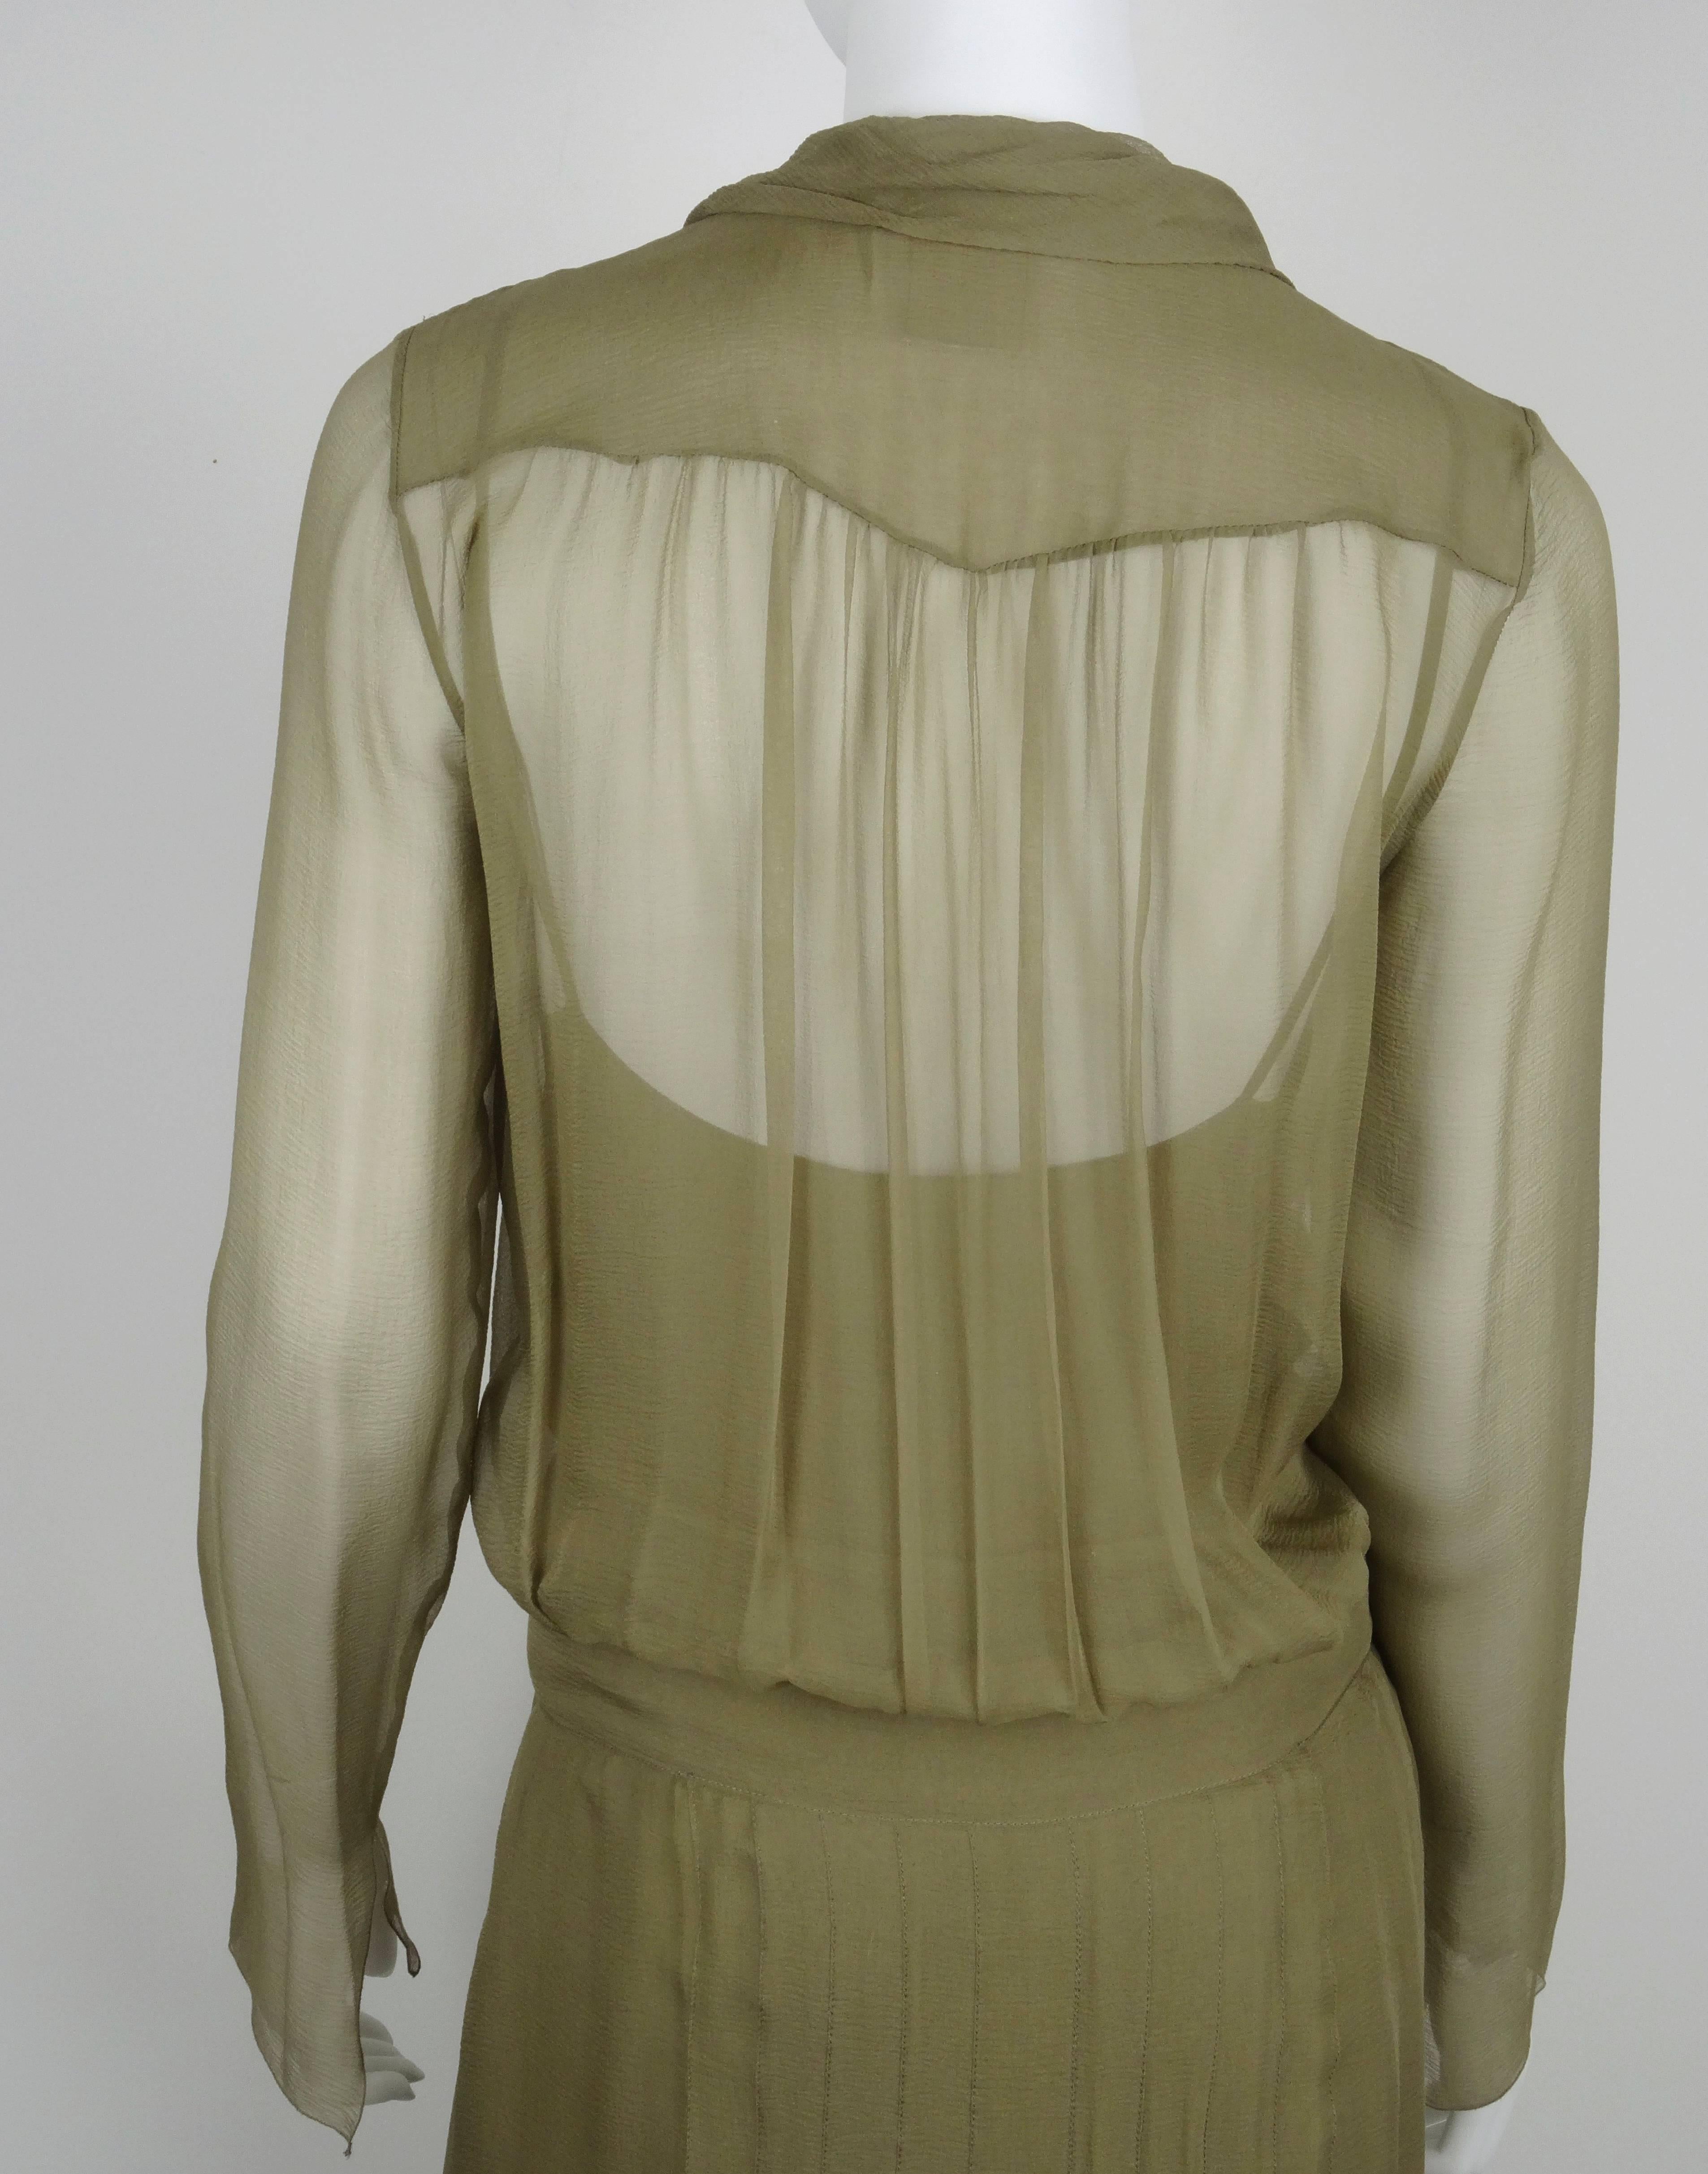 Chanel 2004A Taupe 1920s Style Pleated Sheer Silk 3/4 Length Dress With Bow FR38 For Sale 4